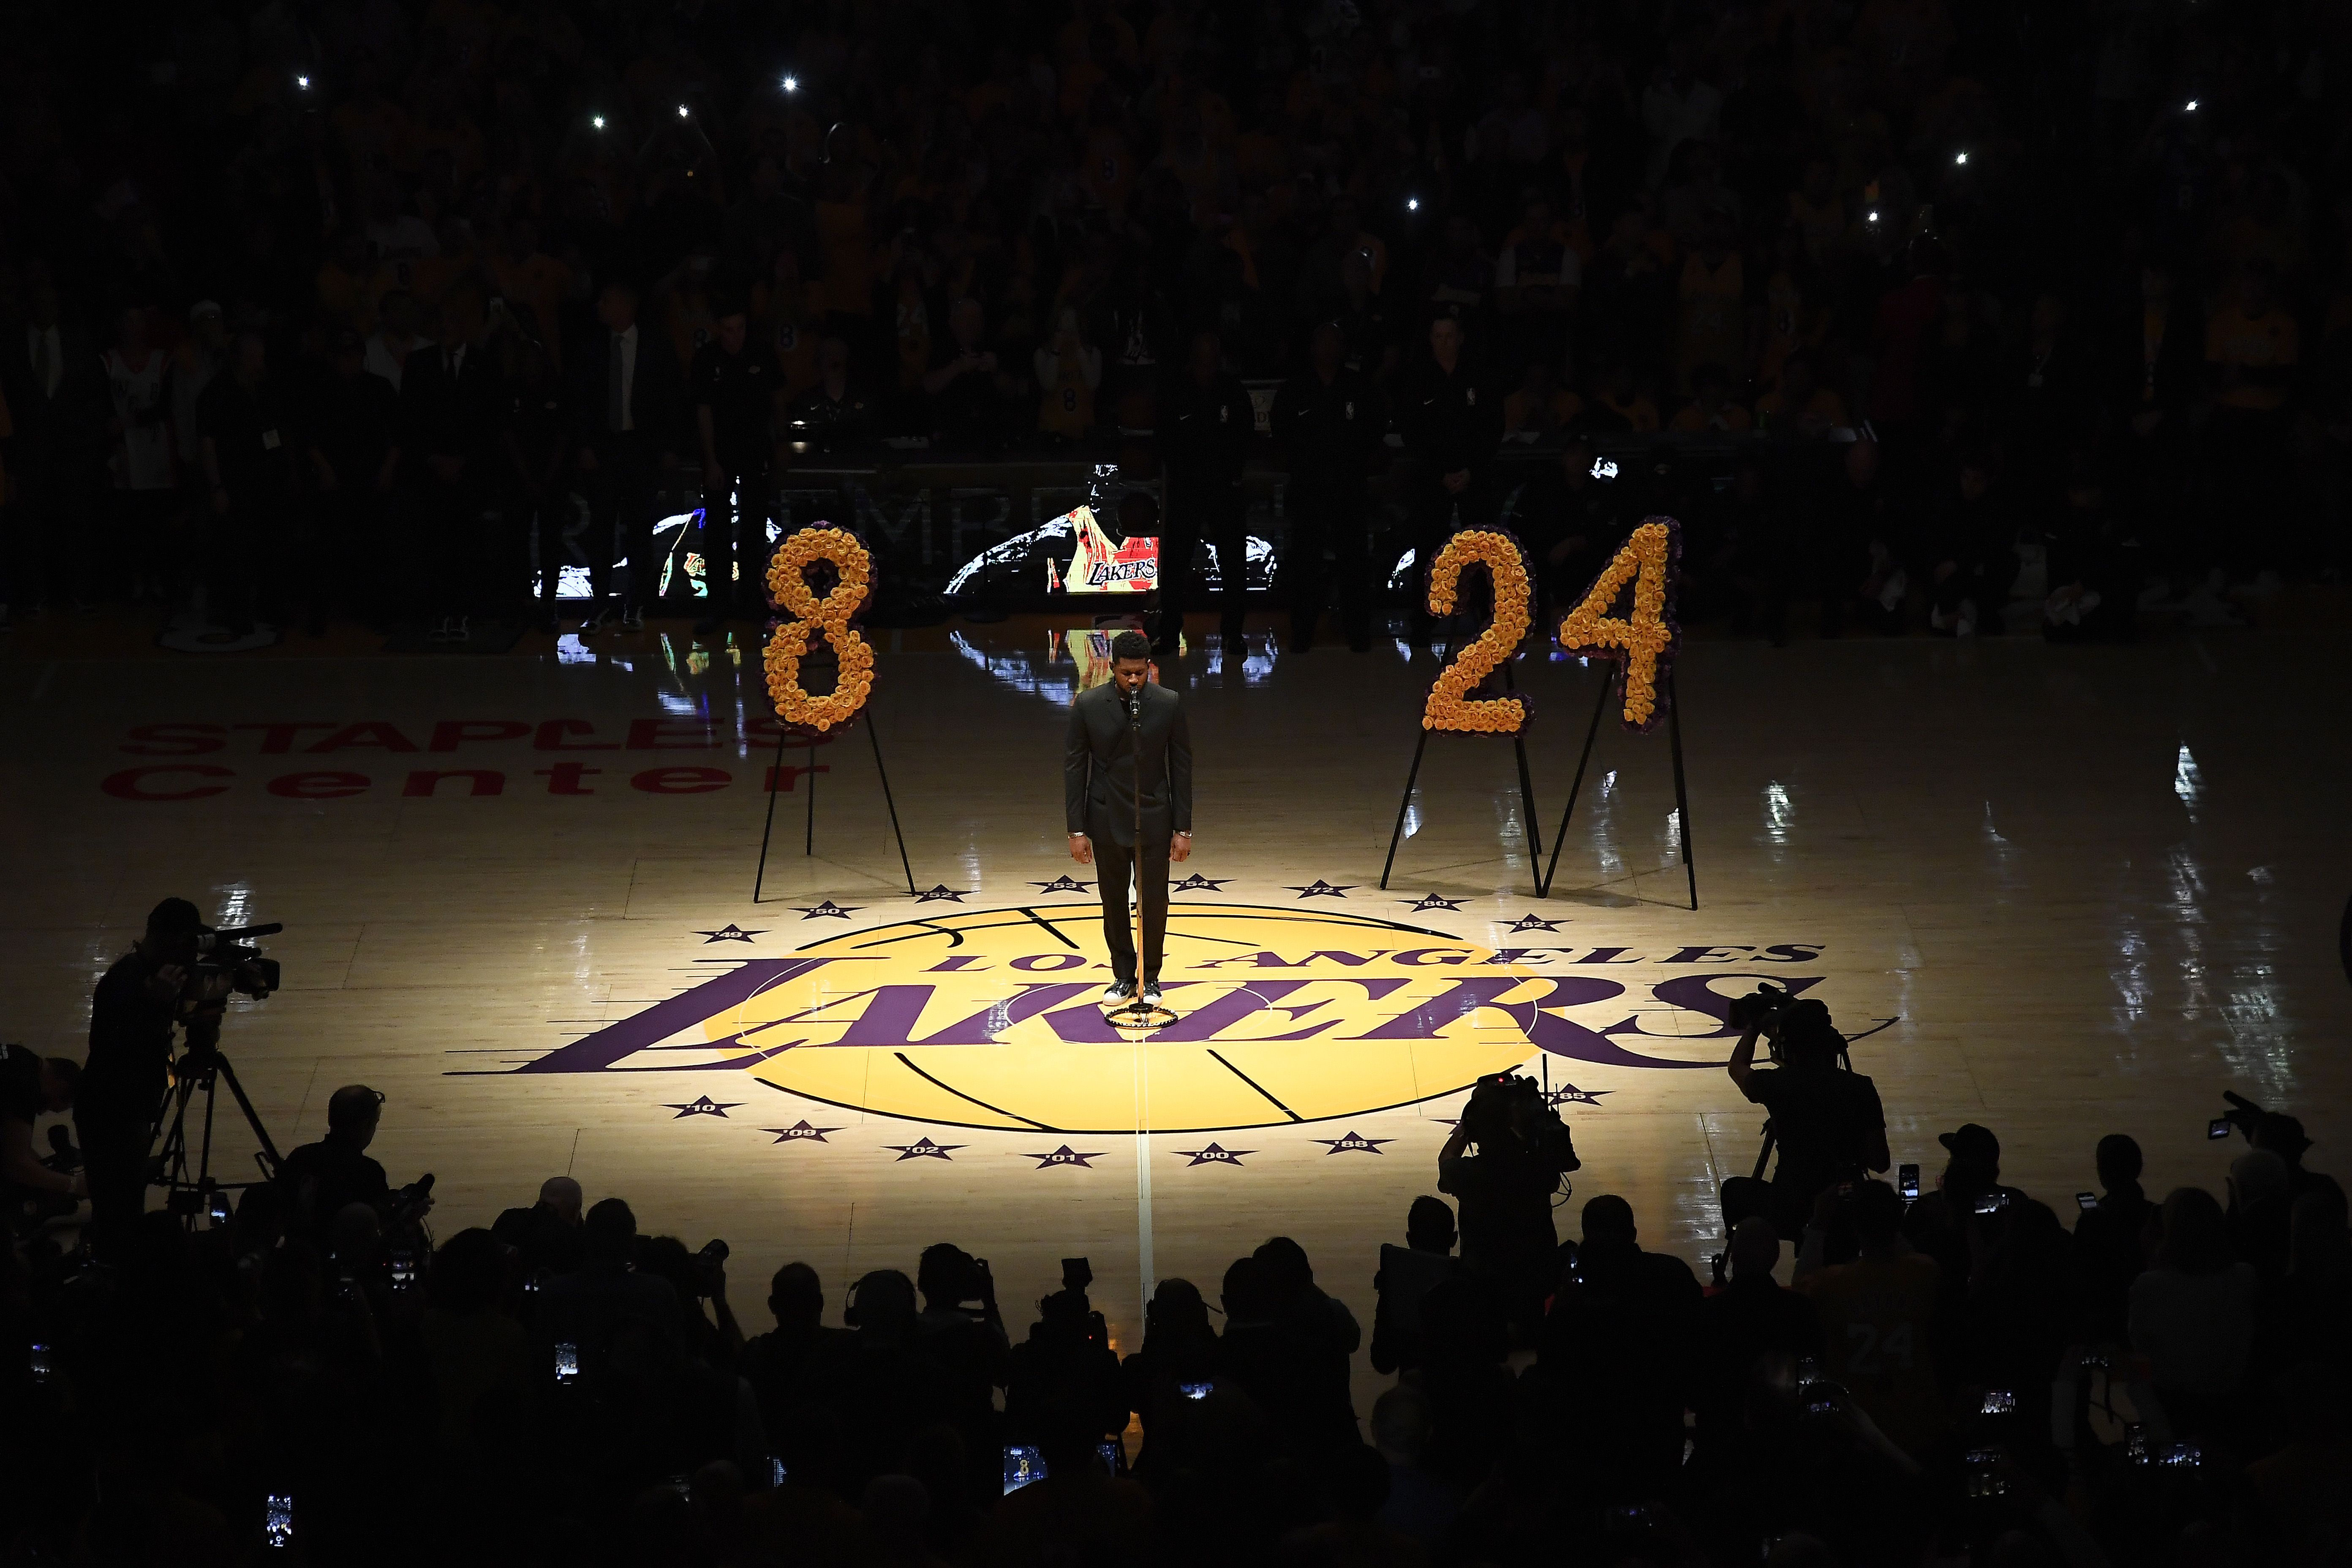 In this image, the lights are dimmed on the court as a large 8 and 24 are displayed next to each other